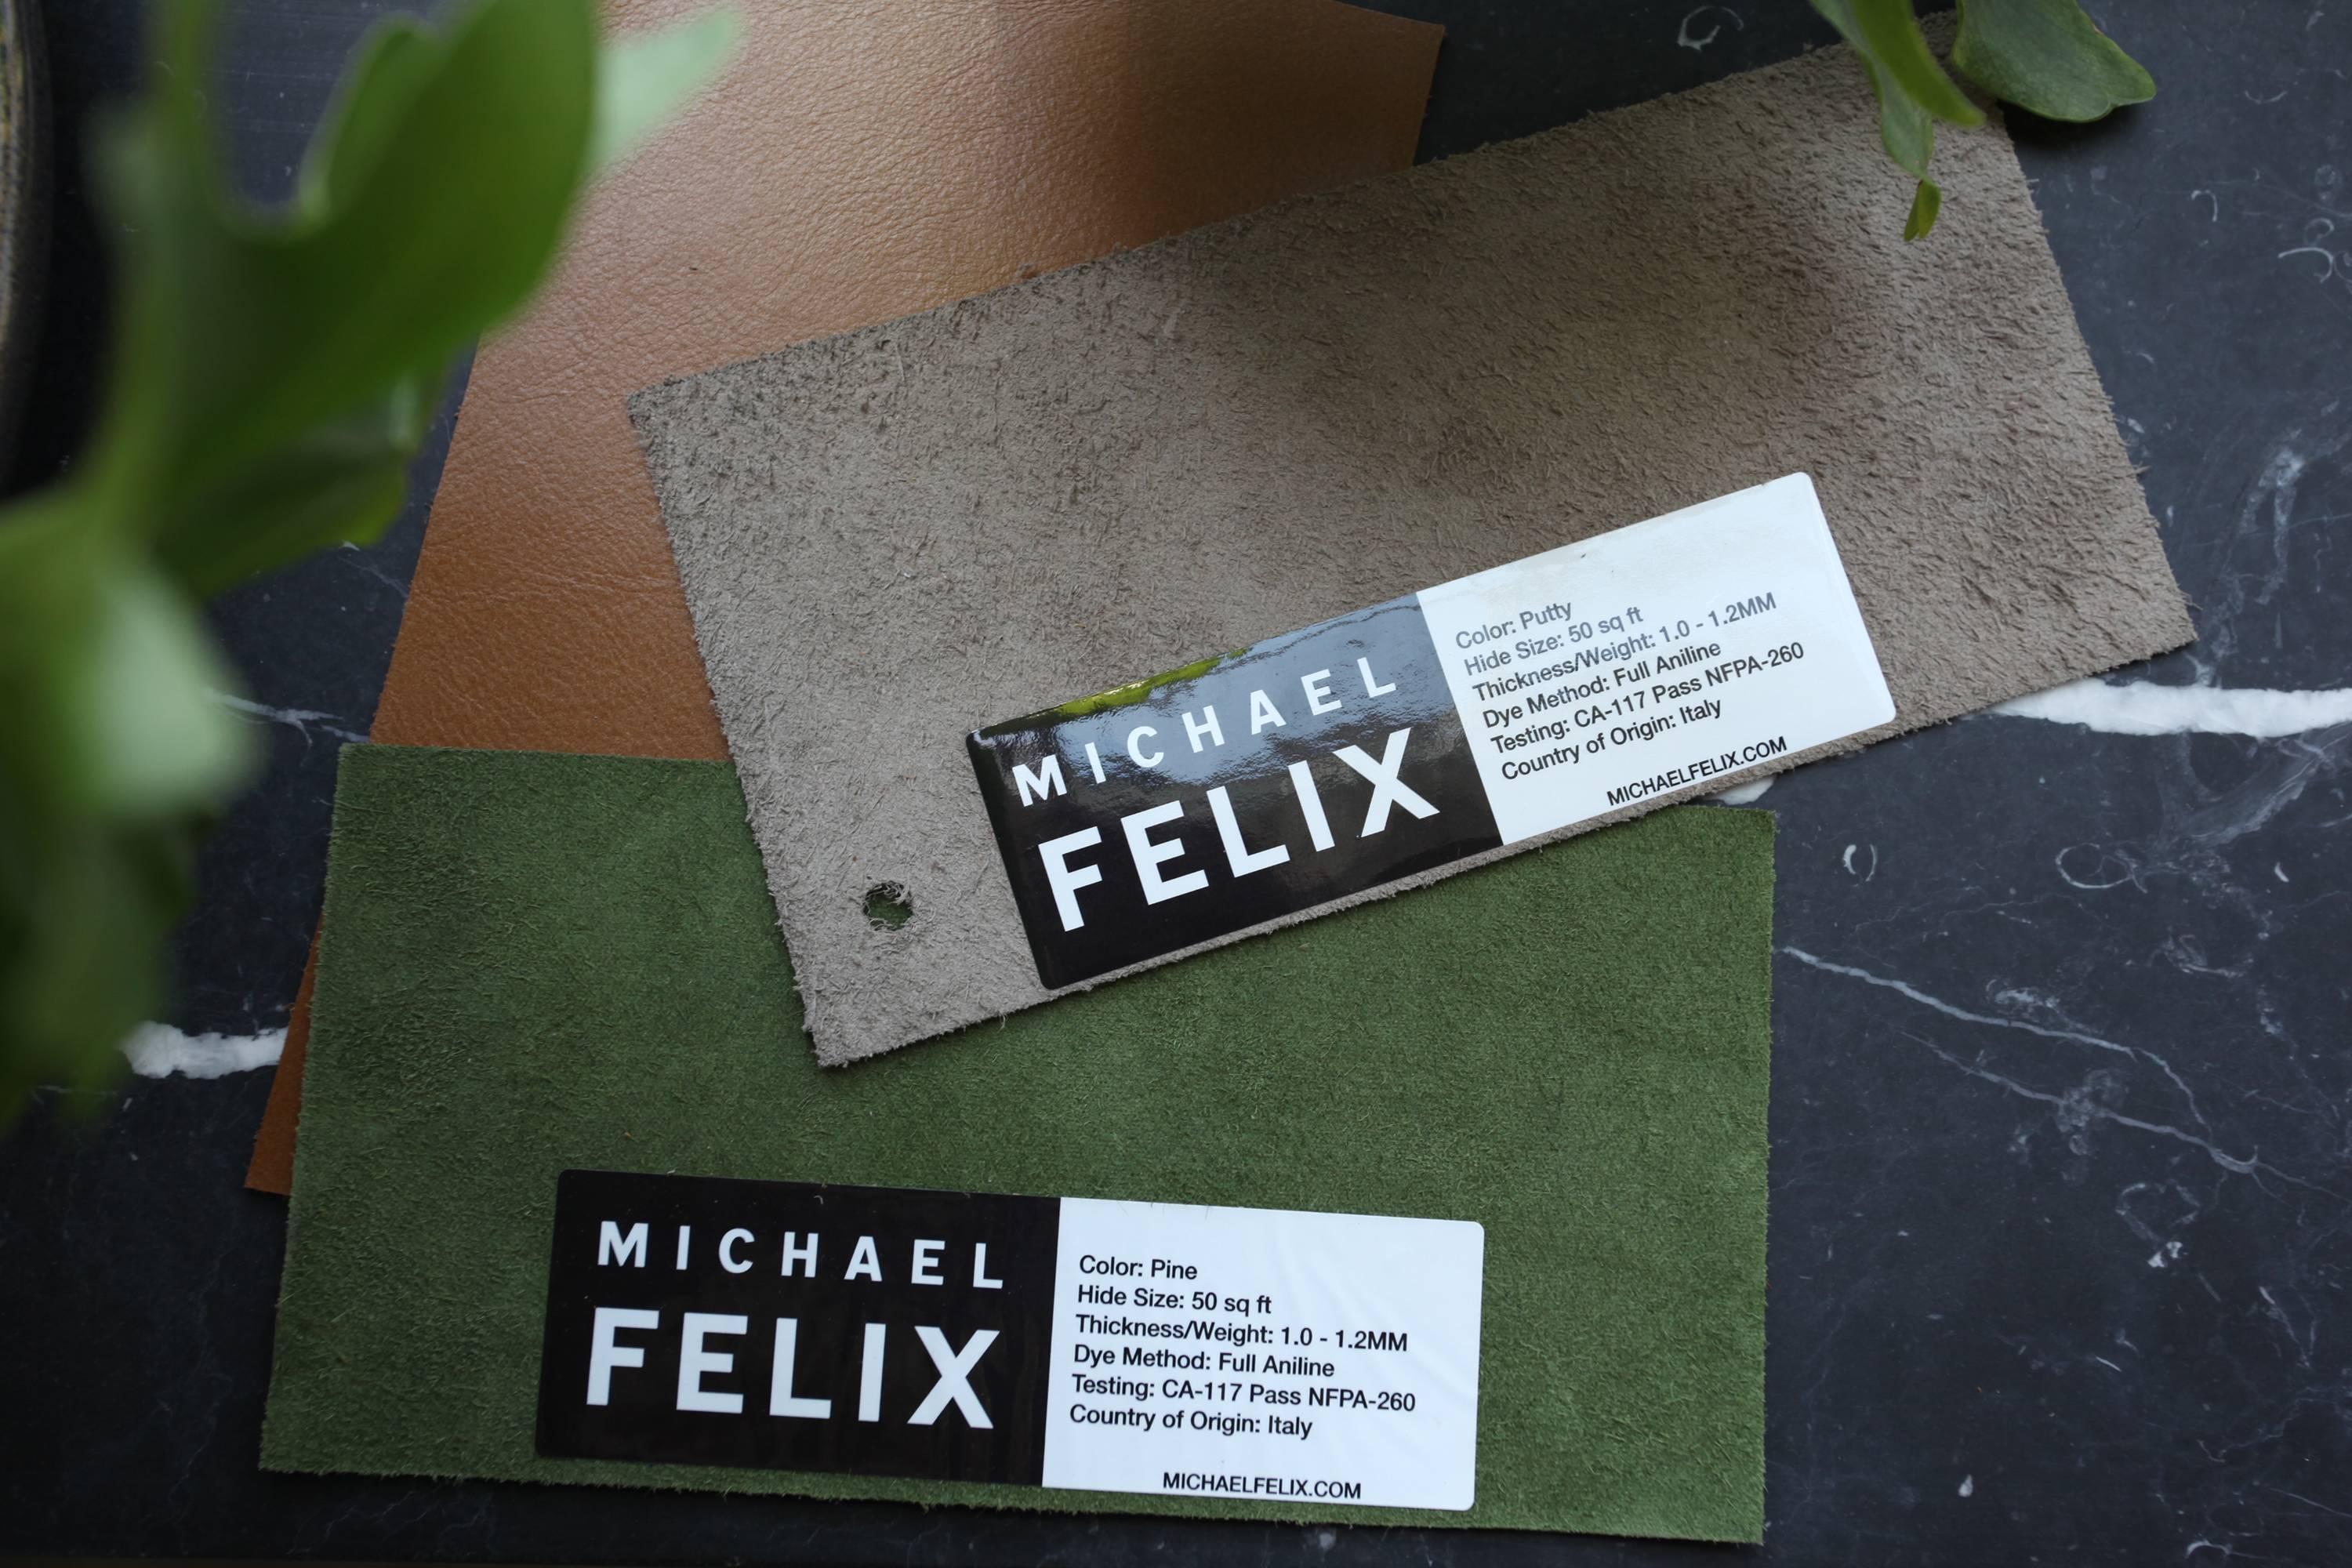 Leather options for the Michael Felix collection (7 pieces total). Swatches are approx. 3x5